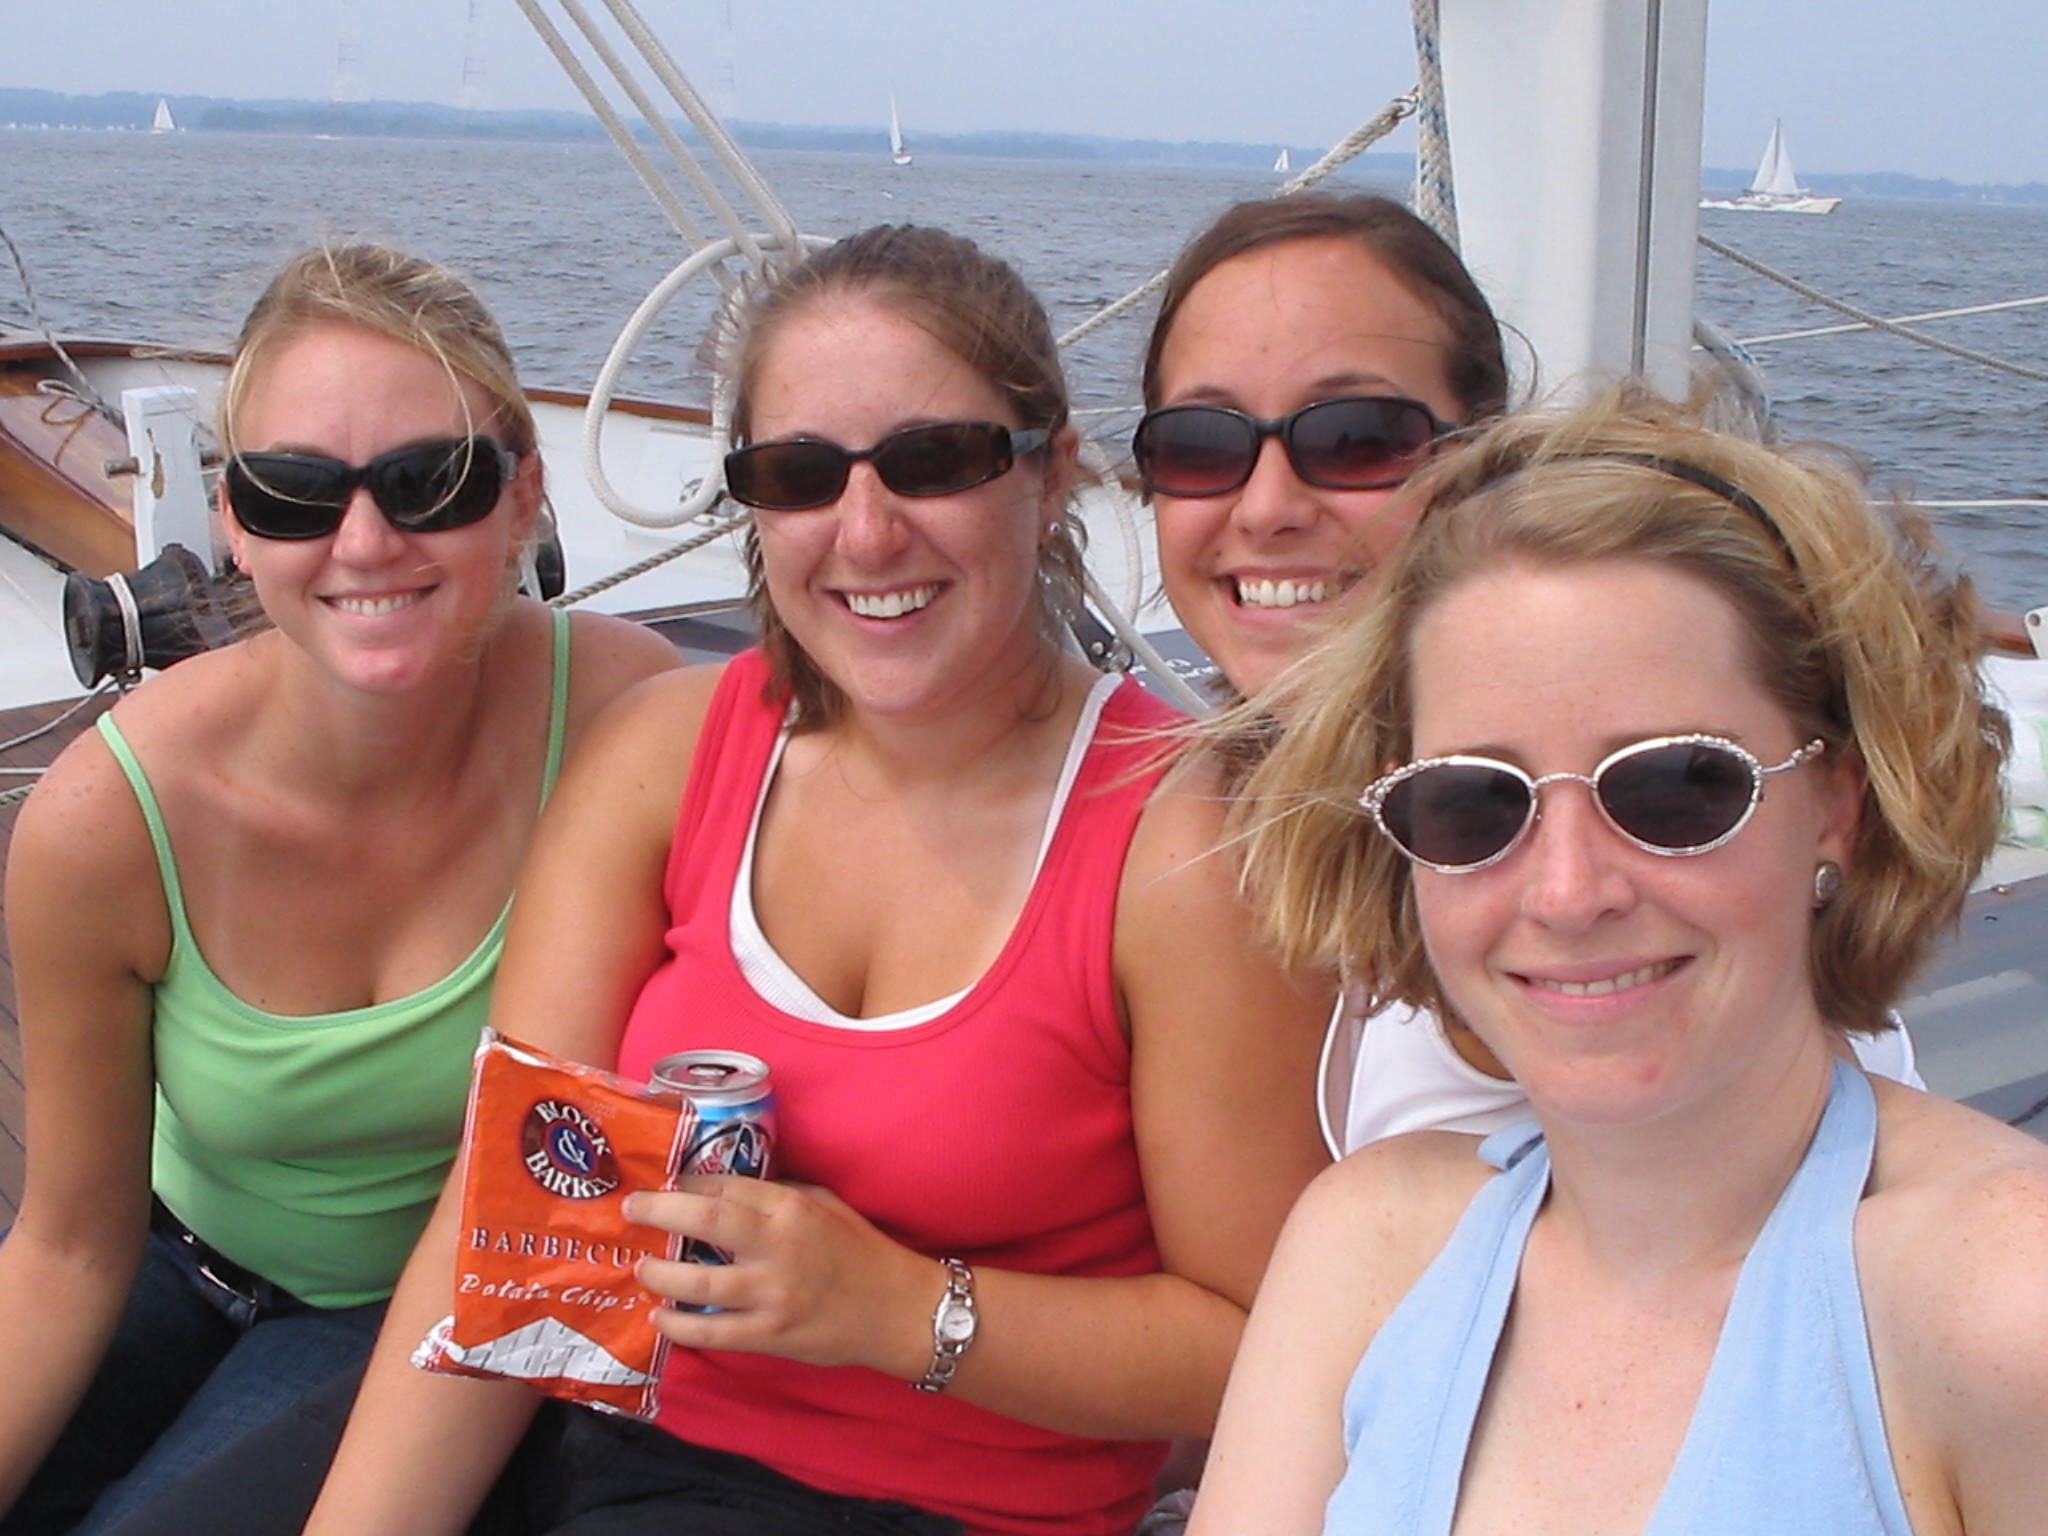 The best way to experience the Chesapeake Bay is under sail on a 74-foot schooner. Plan your next authentic sailing experience; from family parties to reunions or corporate outings or a staff appreciation cruise aboard our fast and fun sailing vessels.